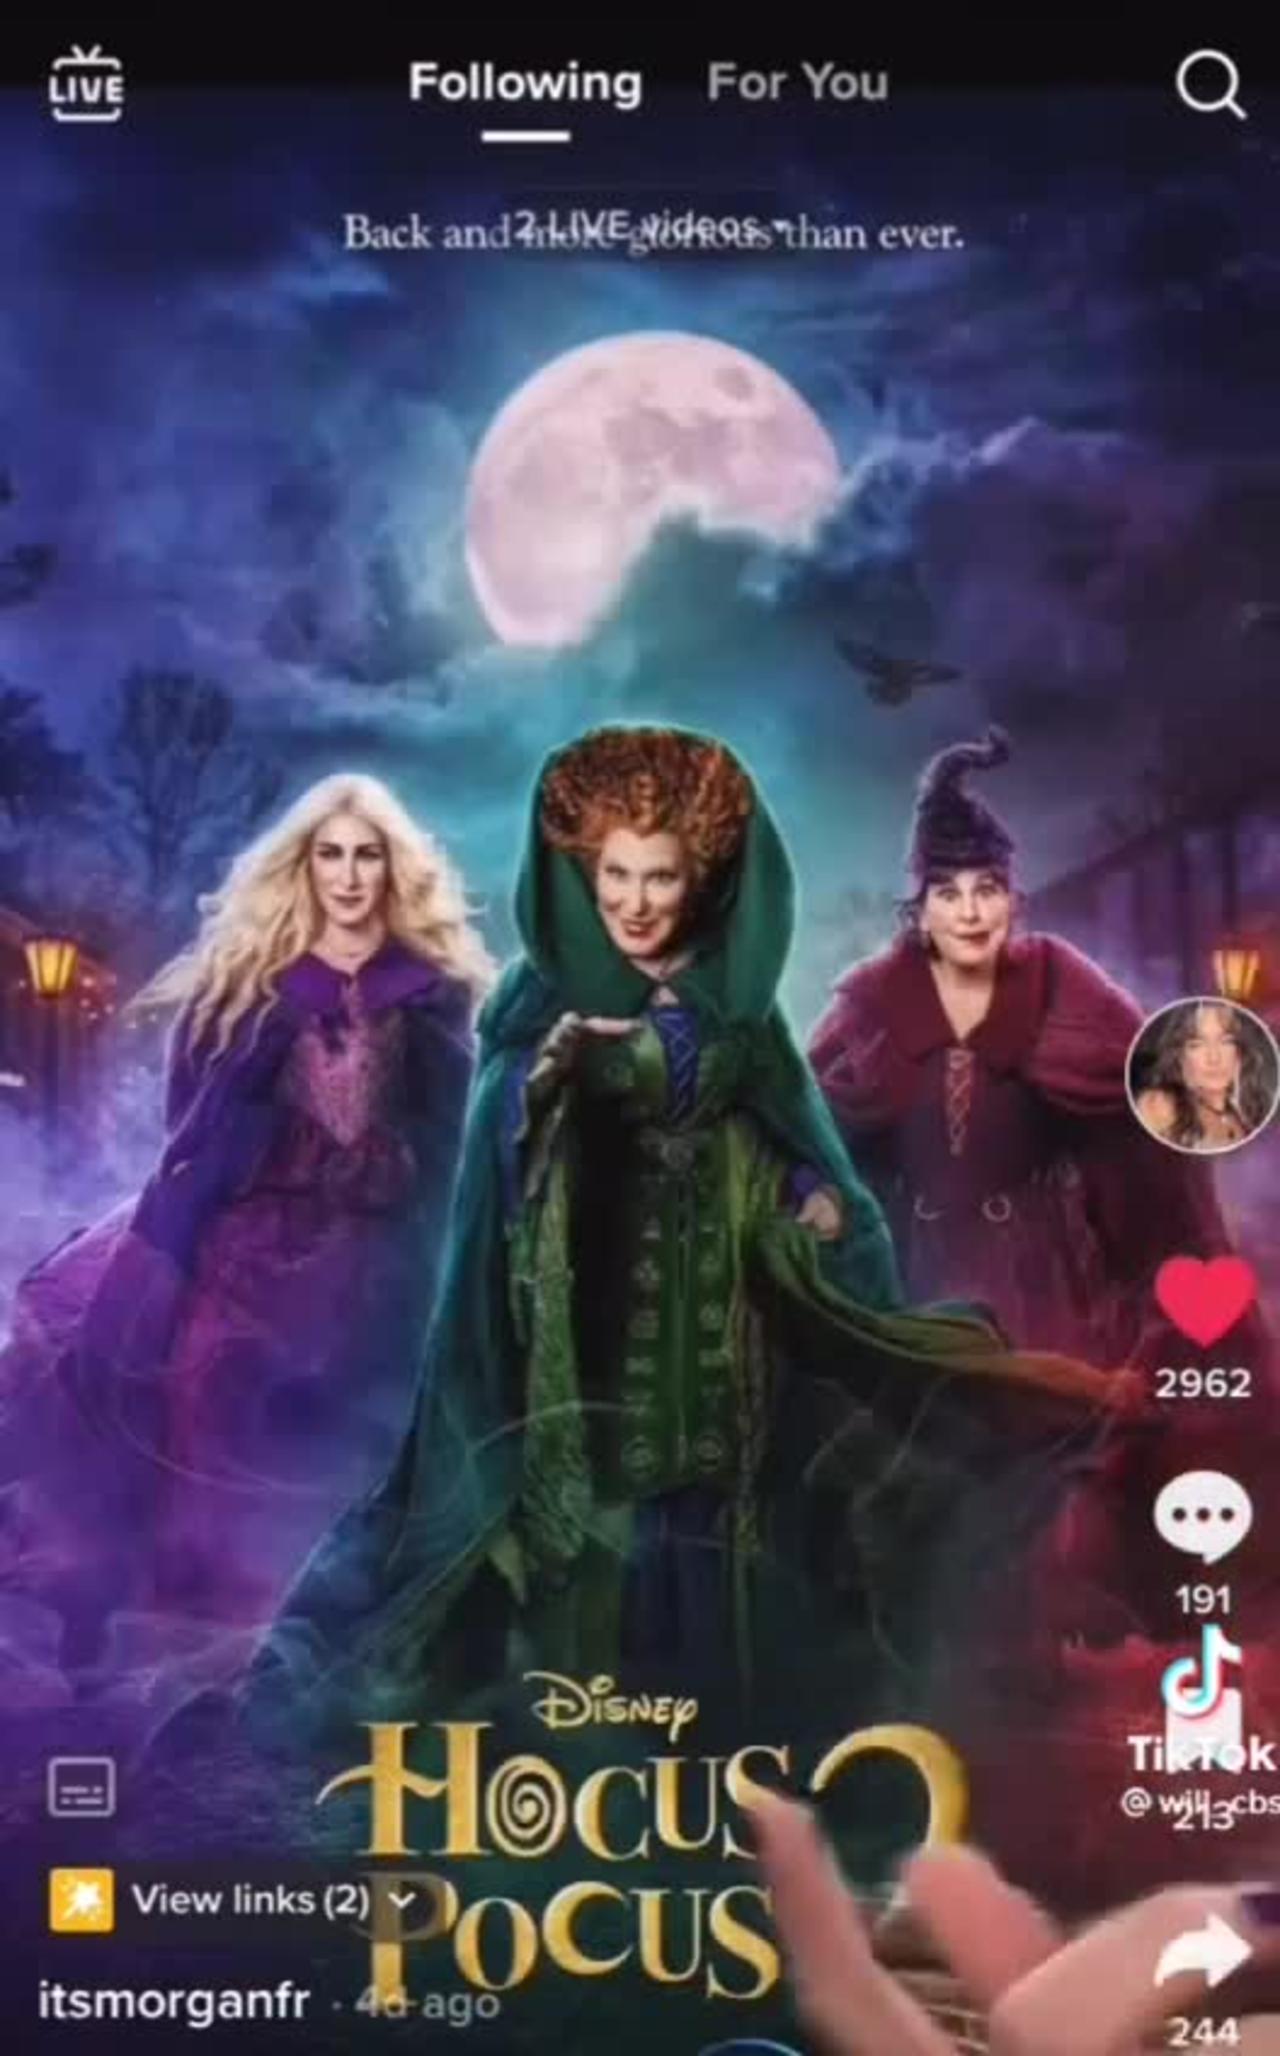 Hocus Pocus, The Disney movie Released In 1993 Was About Sucking The Life Out Of Children